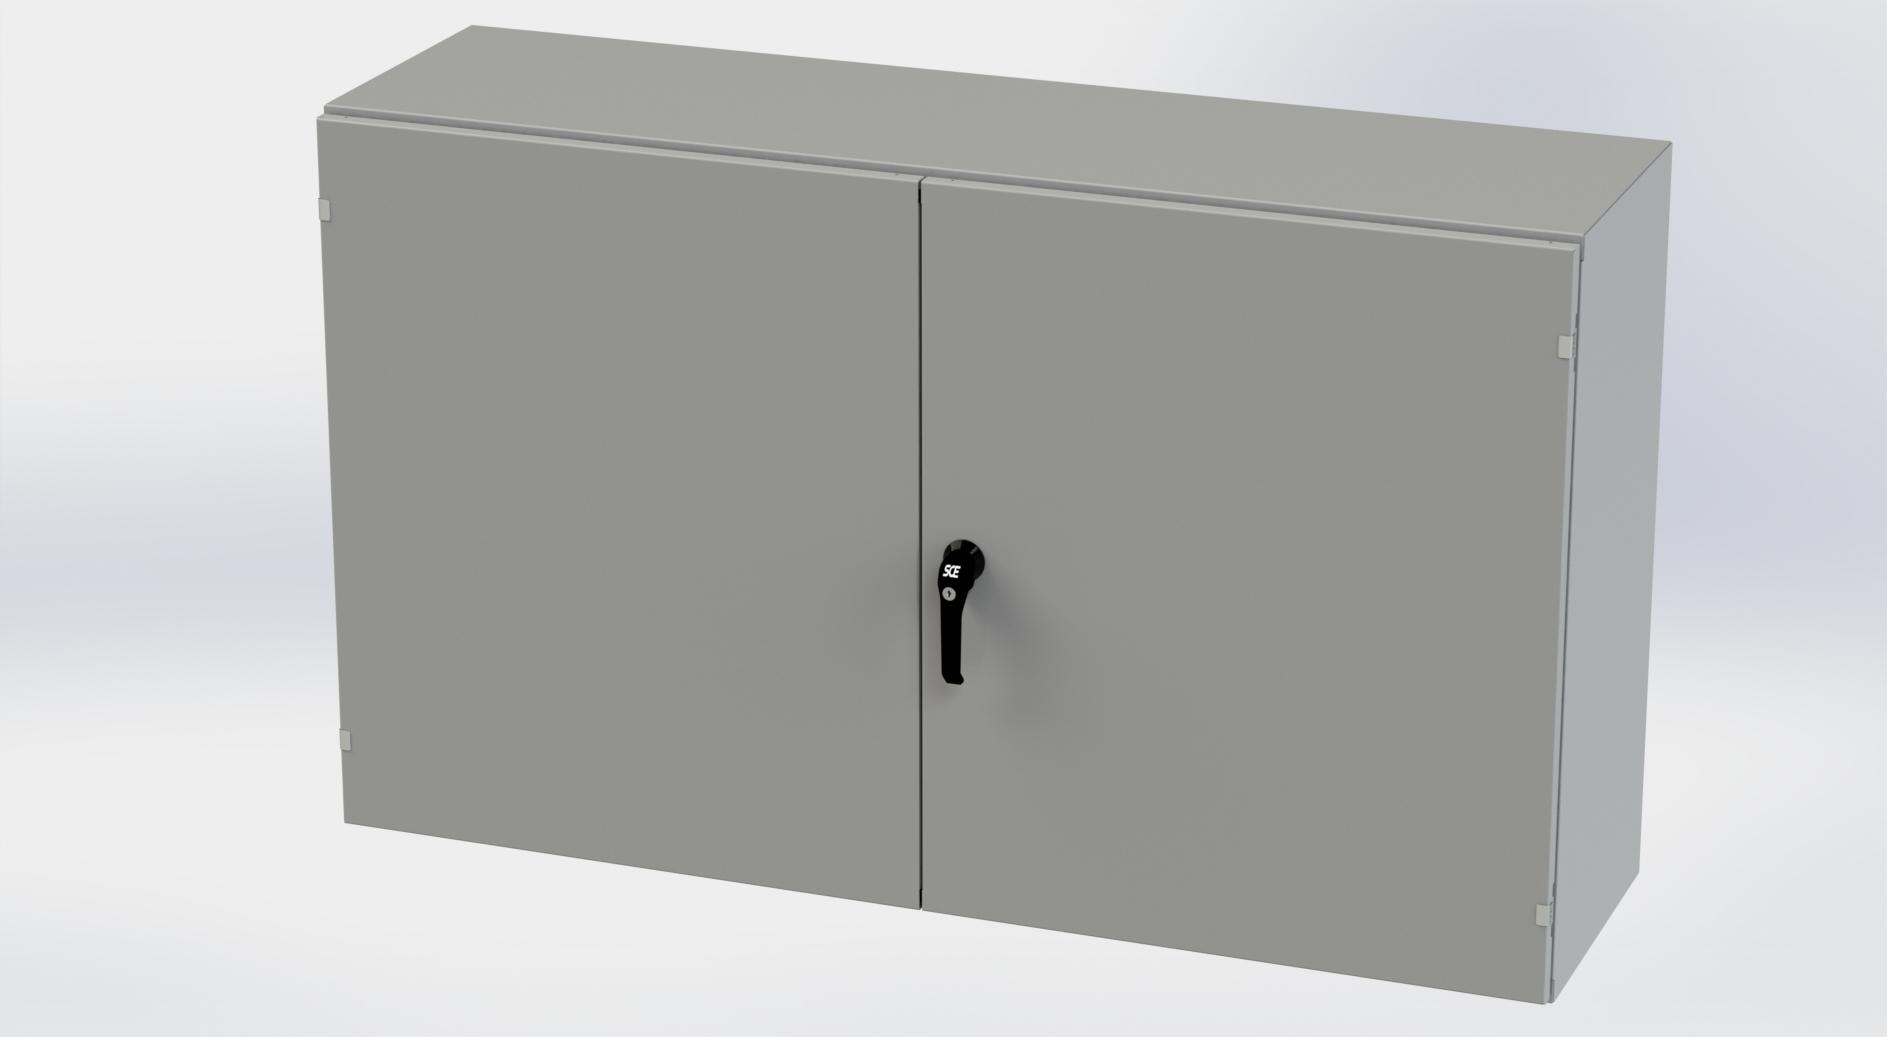 Saginaw Control SCE-366016WFLP WFLP Enclosure, Height:36.00", Width:60.00", Depth:16.00", ANSI-61 gray powder coating inside and out.